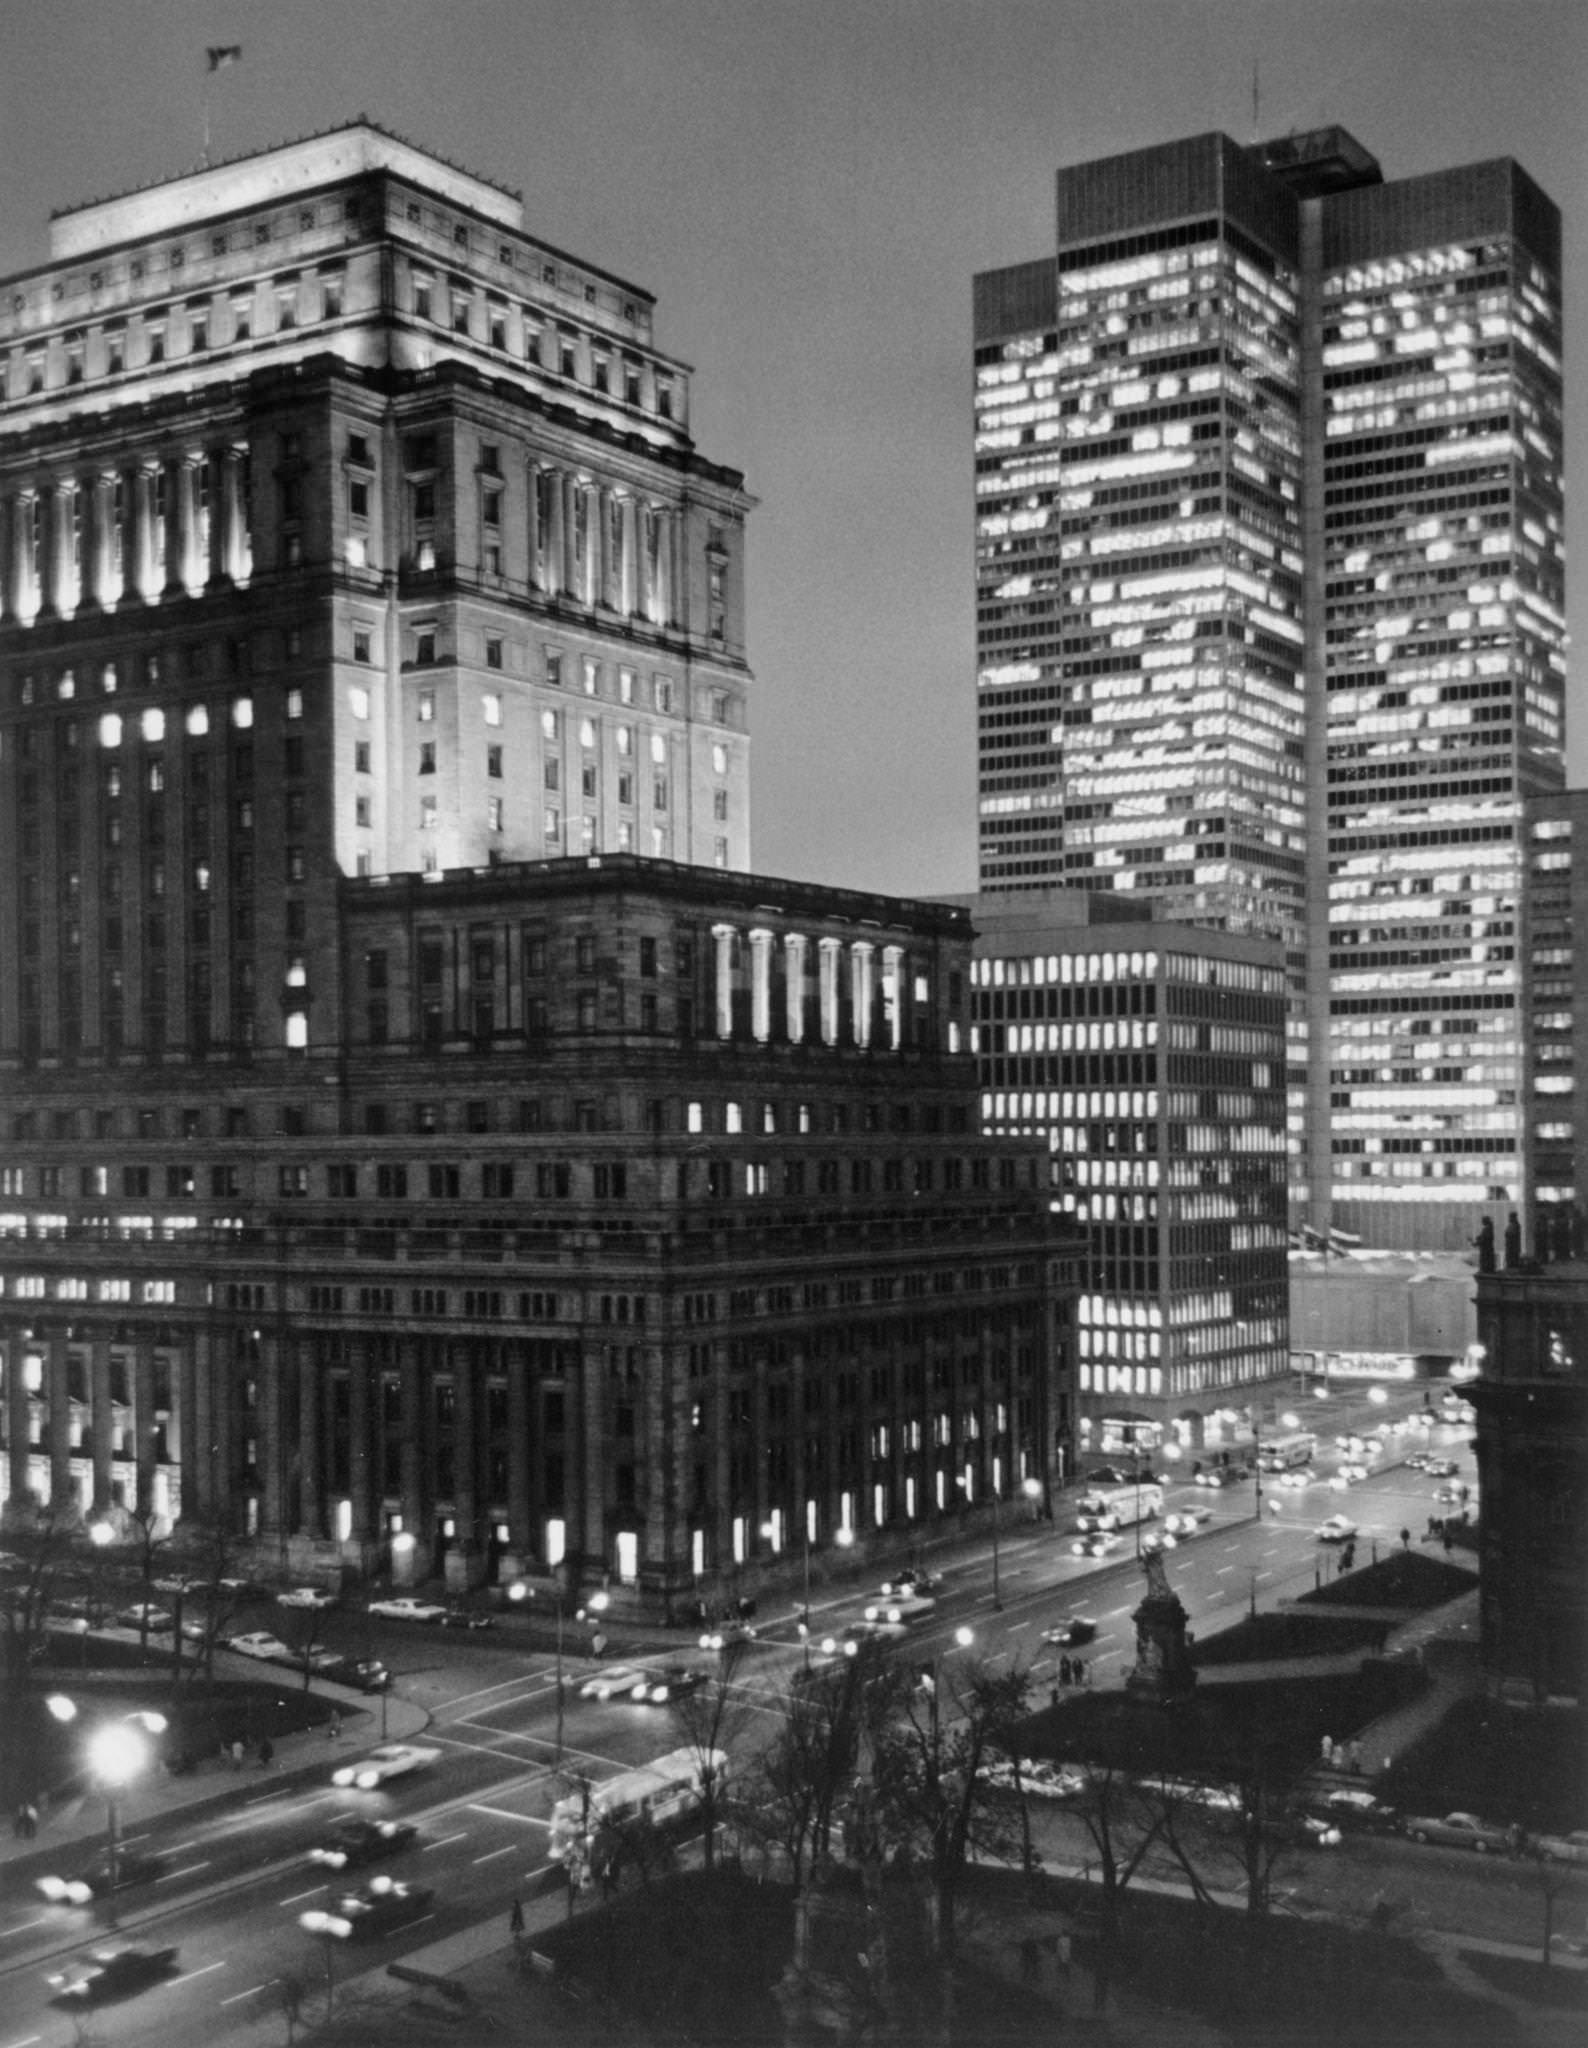 High-rise buildings in the evening, Montreal, 1960s